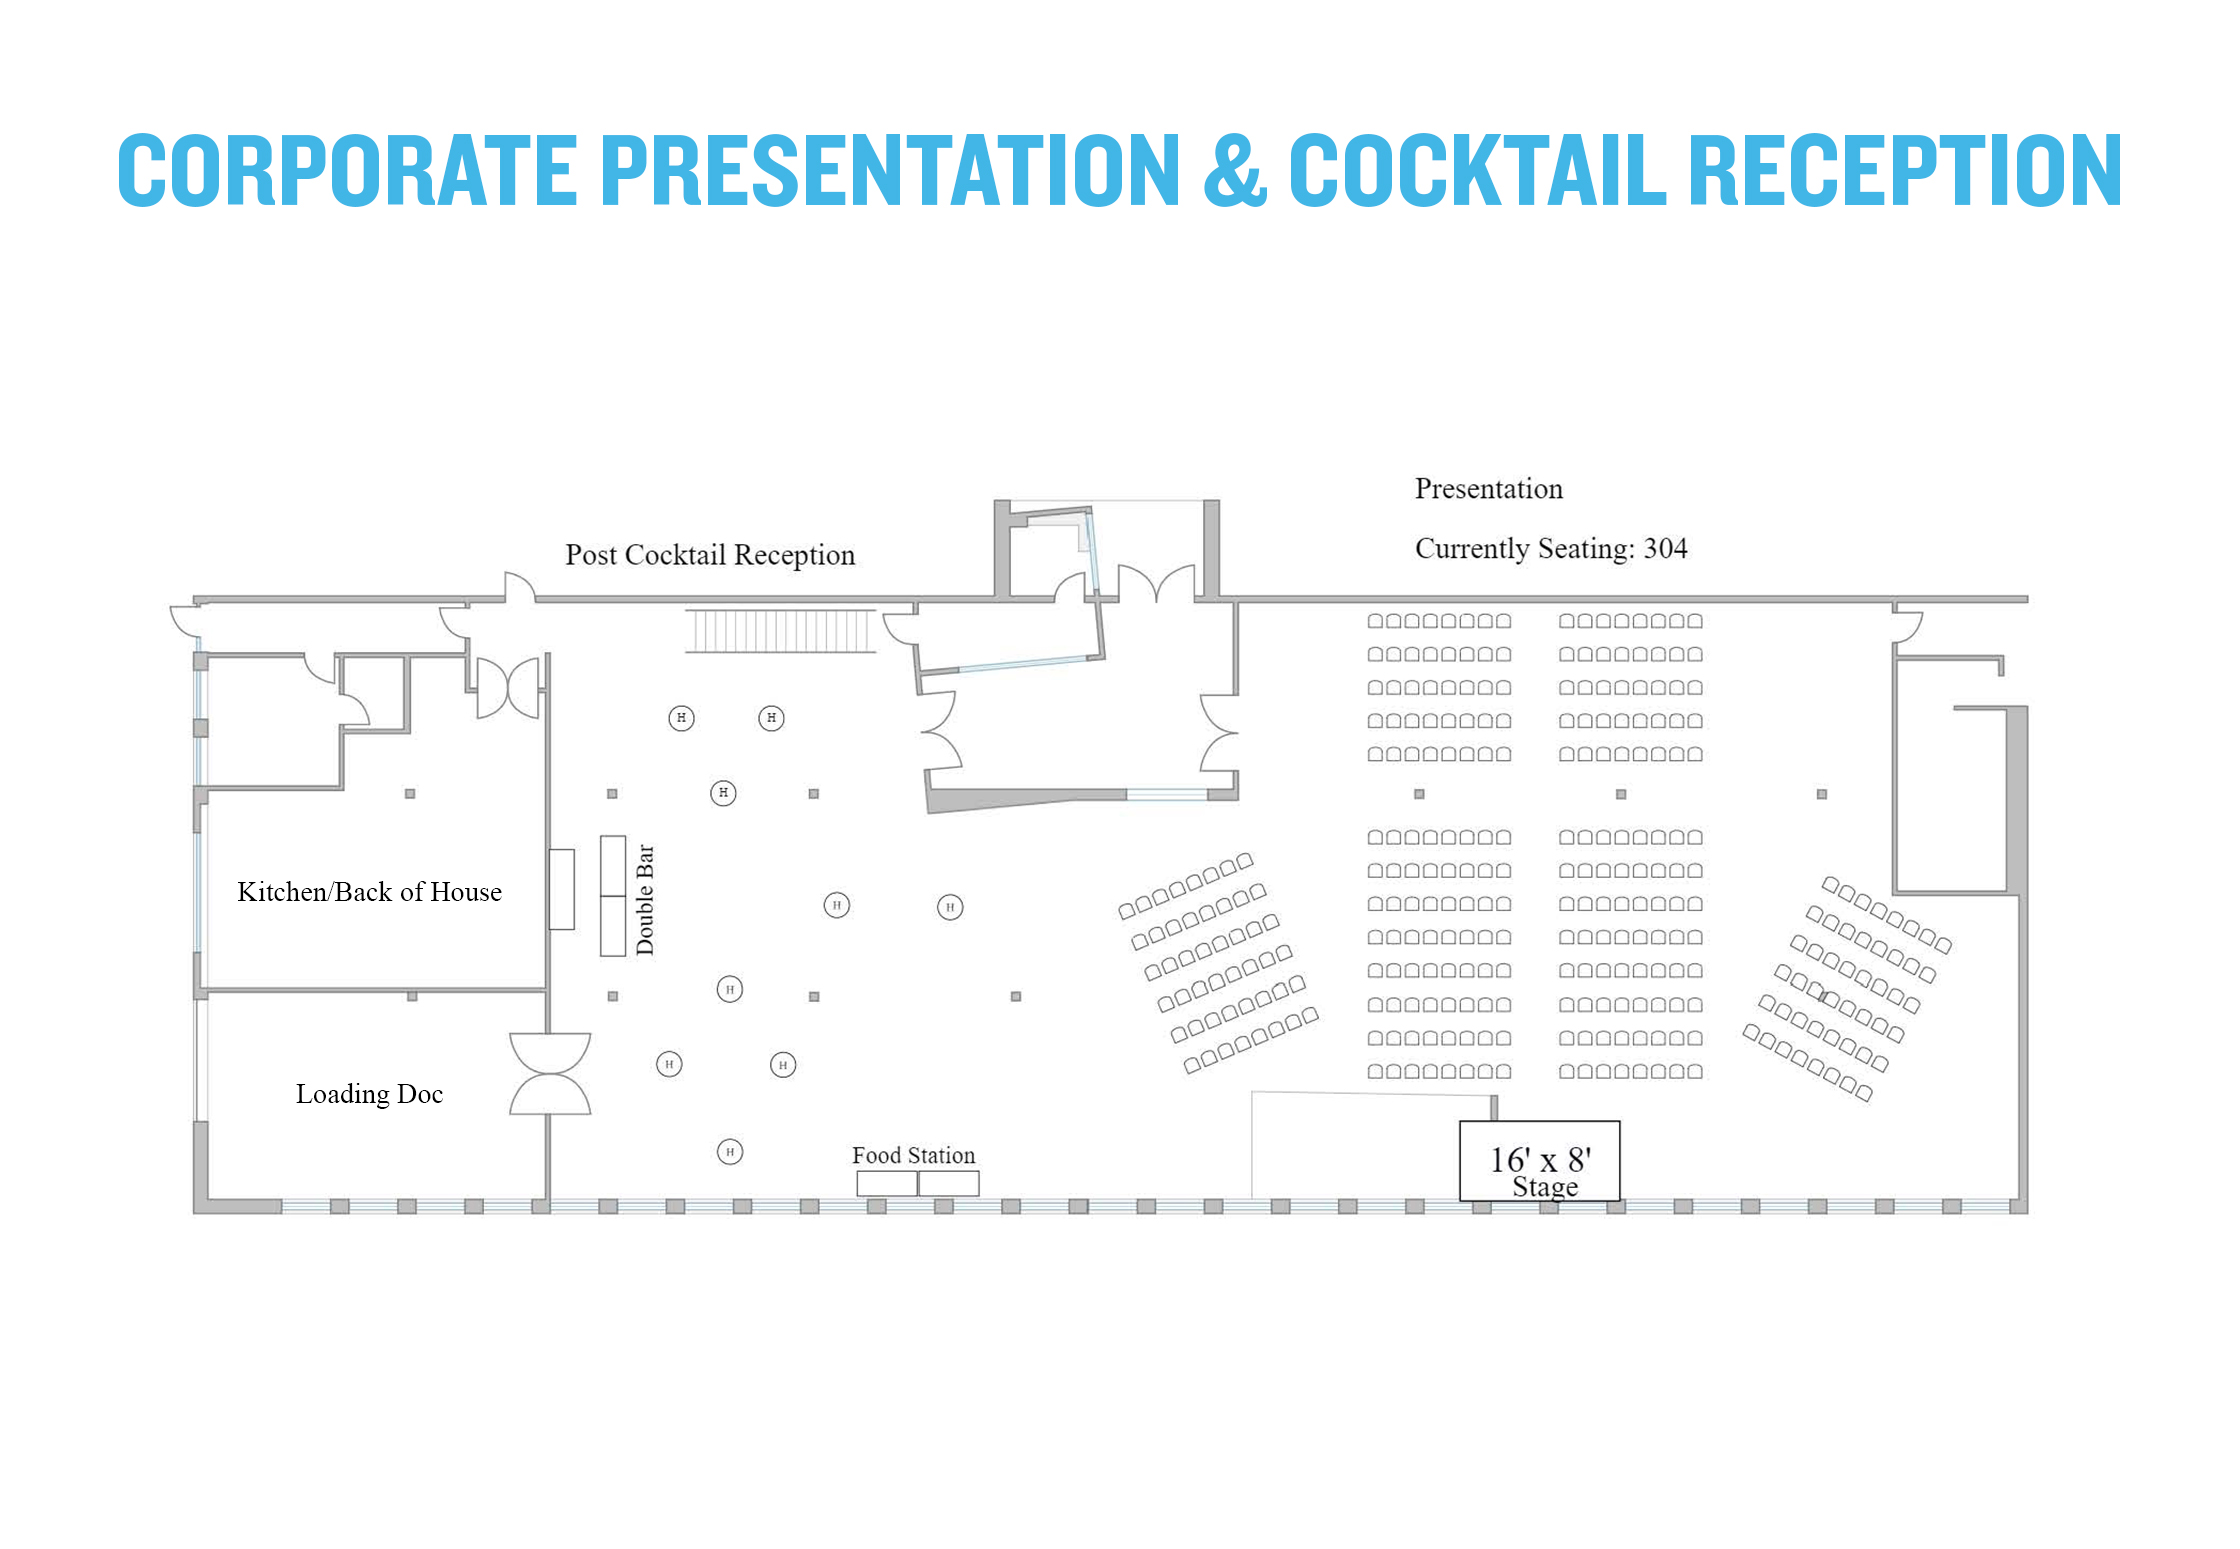 This layout seats 304 guests which includes one food station, one double bar, and a stage.